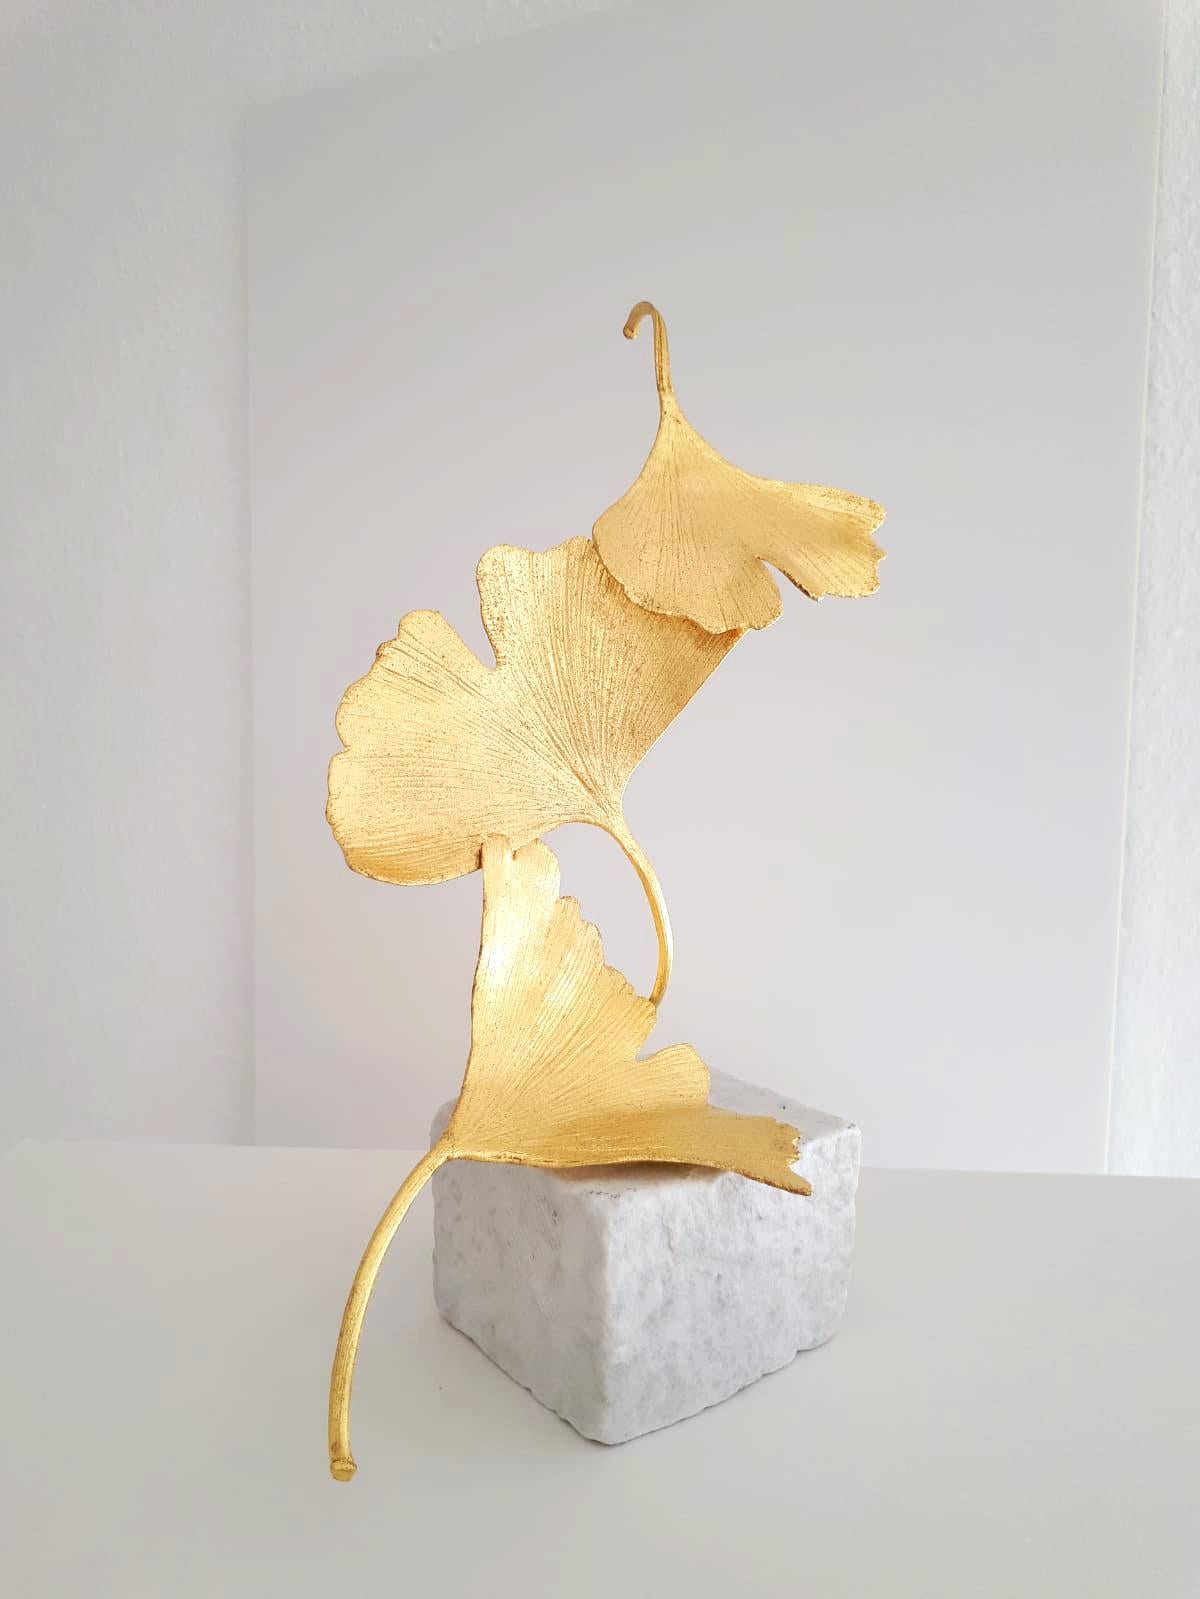 Artist: Kuno Vollet
Title: 3 Golden Gingko Leaves
Materials: Cast brass, gold leaf, white marble base
Size: 25 x 9 x 9 cm

This small elegant original bronze cast sculpture by German artist Kuno Vollet brings nature and energy into any art